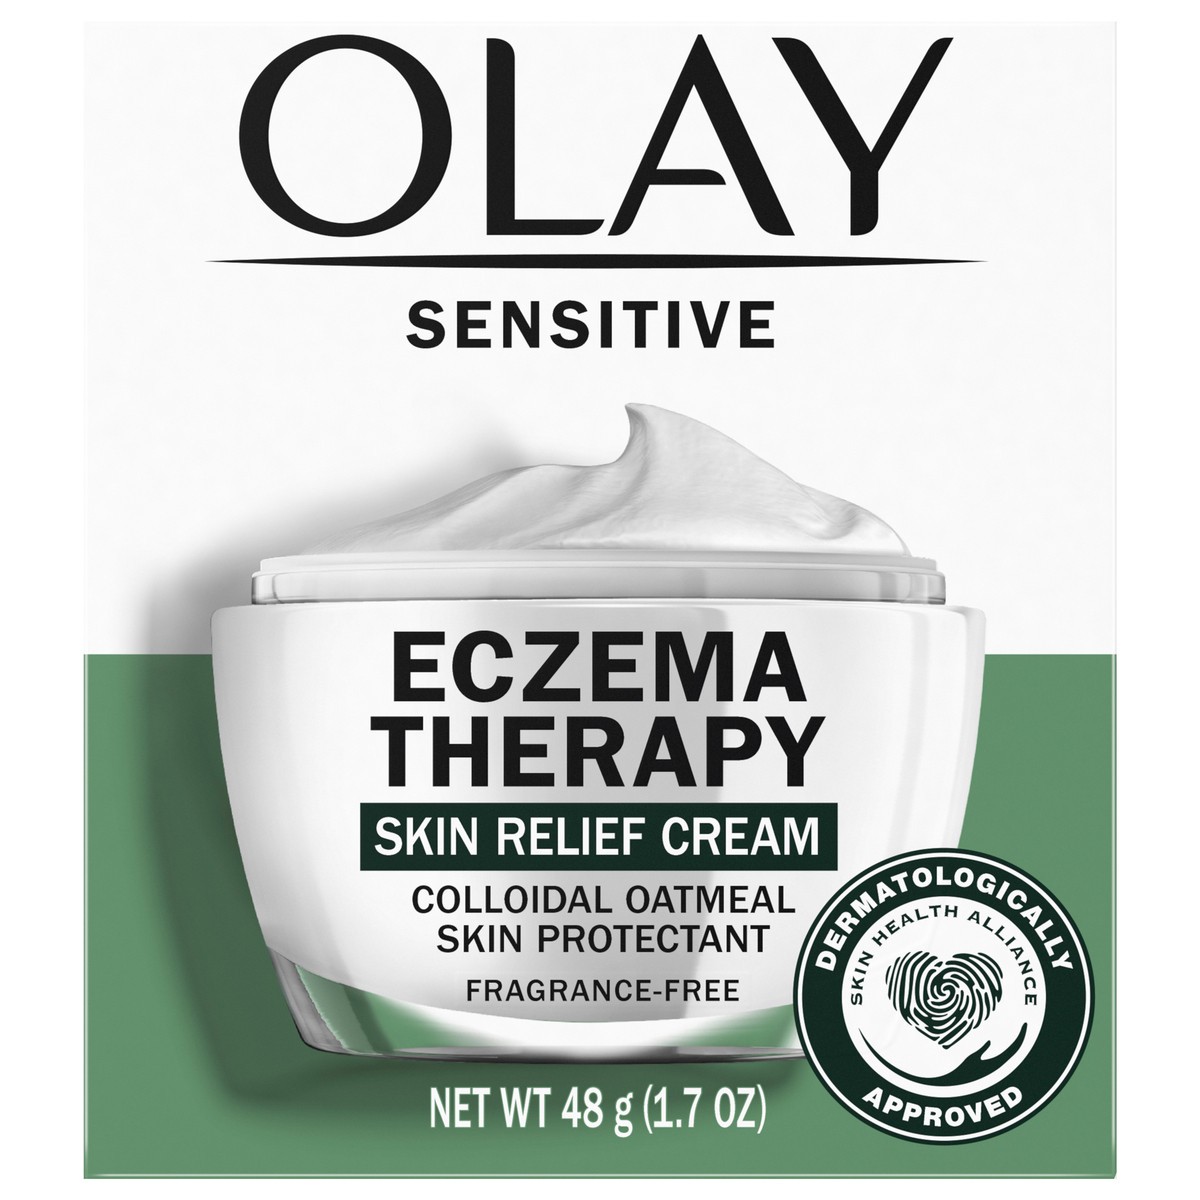 slide 1 of 22, Olay Sensitive Eczema Therapy Face Moisturizer Skin Relief Cream, 1.7 fl oz Fragrance-Free Skin Care Treatment with Colloidal Oatmeal, 1.7 oz